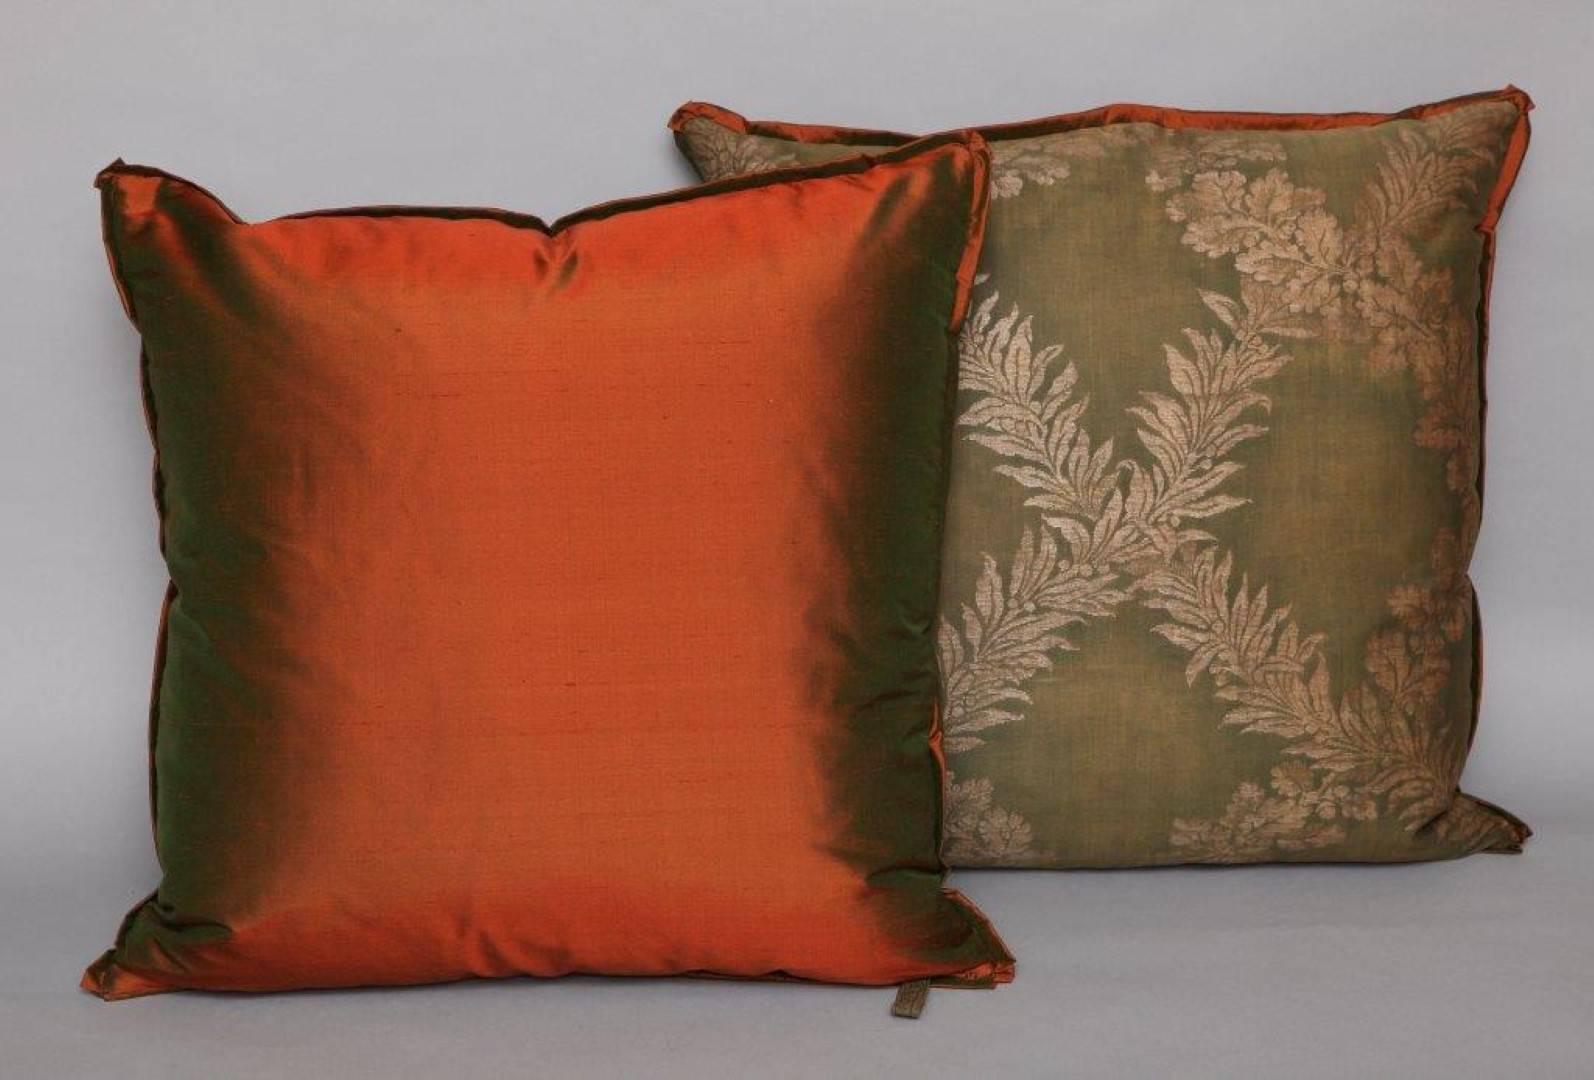 A pair of Fortuny fabric cushions in the Crosoni pattern, green ground with silk bias edging and red taffeta backing material, the pattern, an 18th century French Empire design with formal motif. Newly made using vintage Fortuny fabric, discontinued